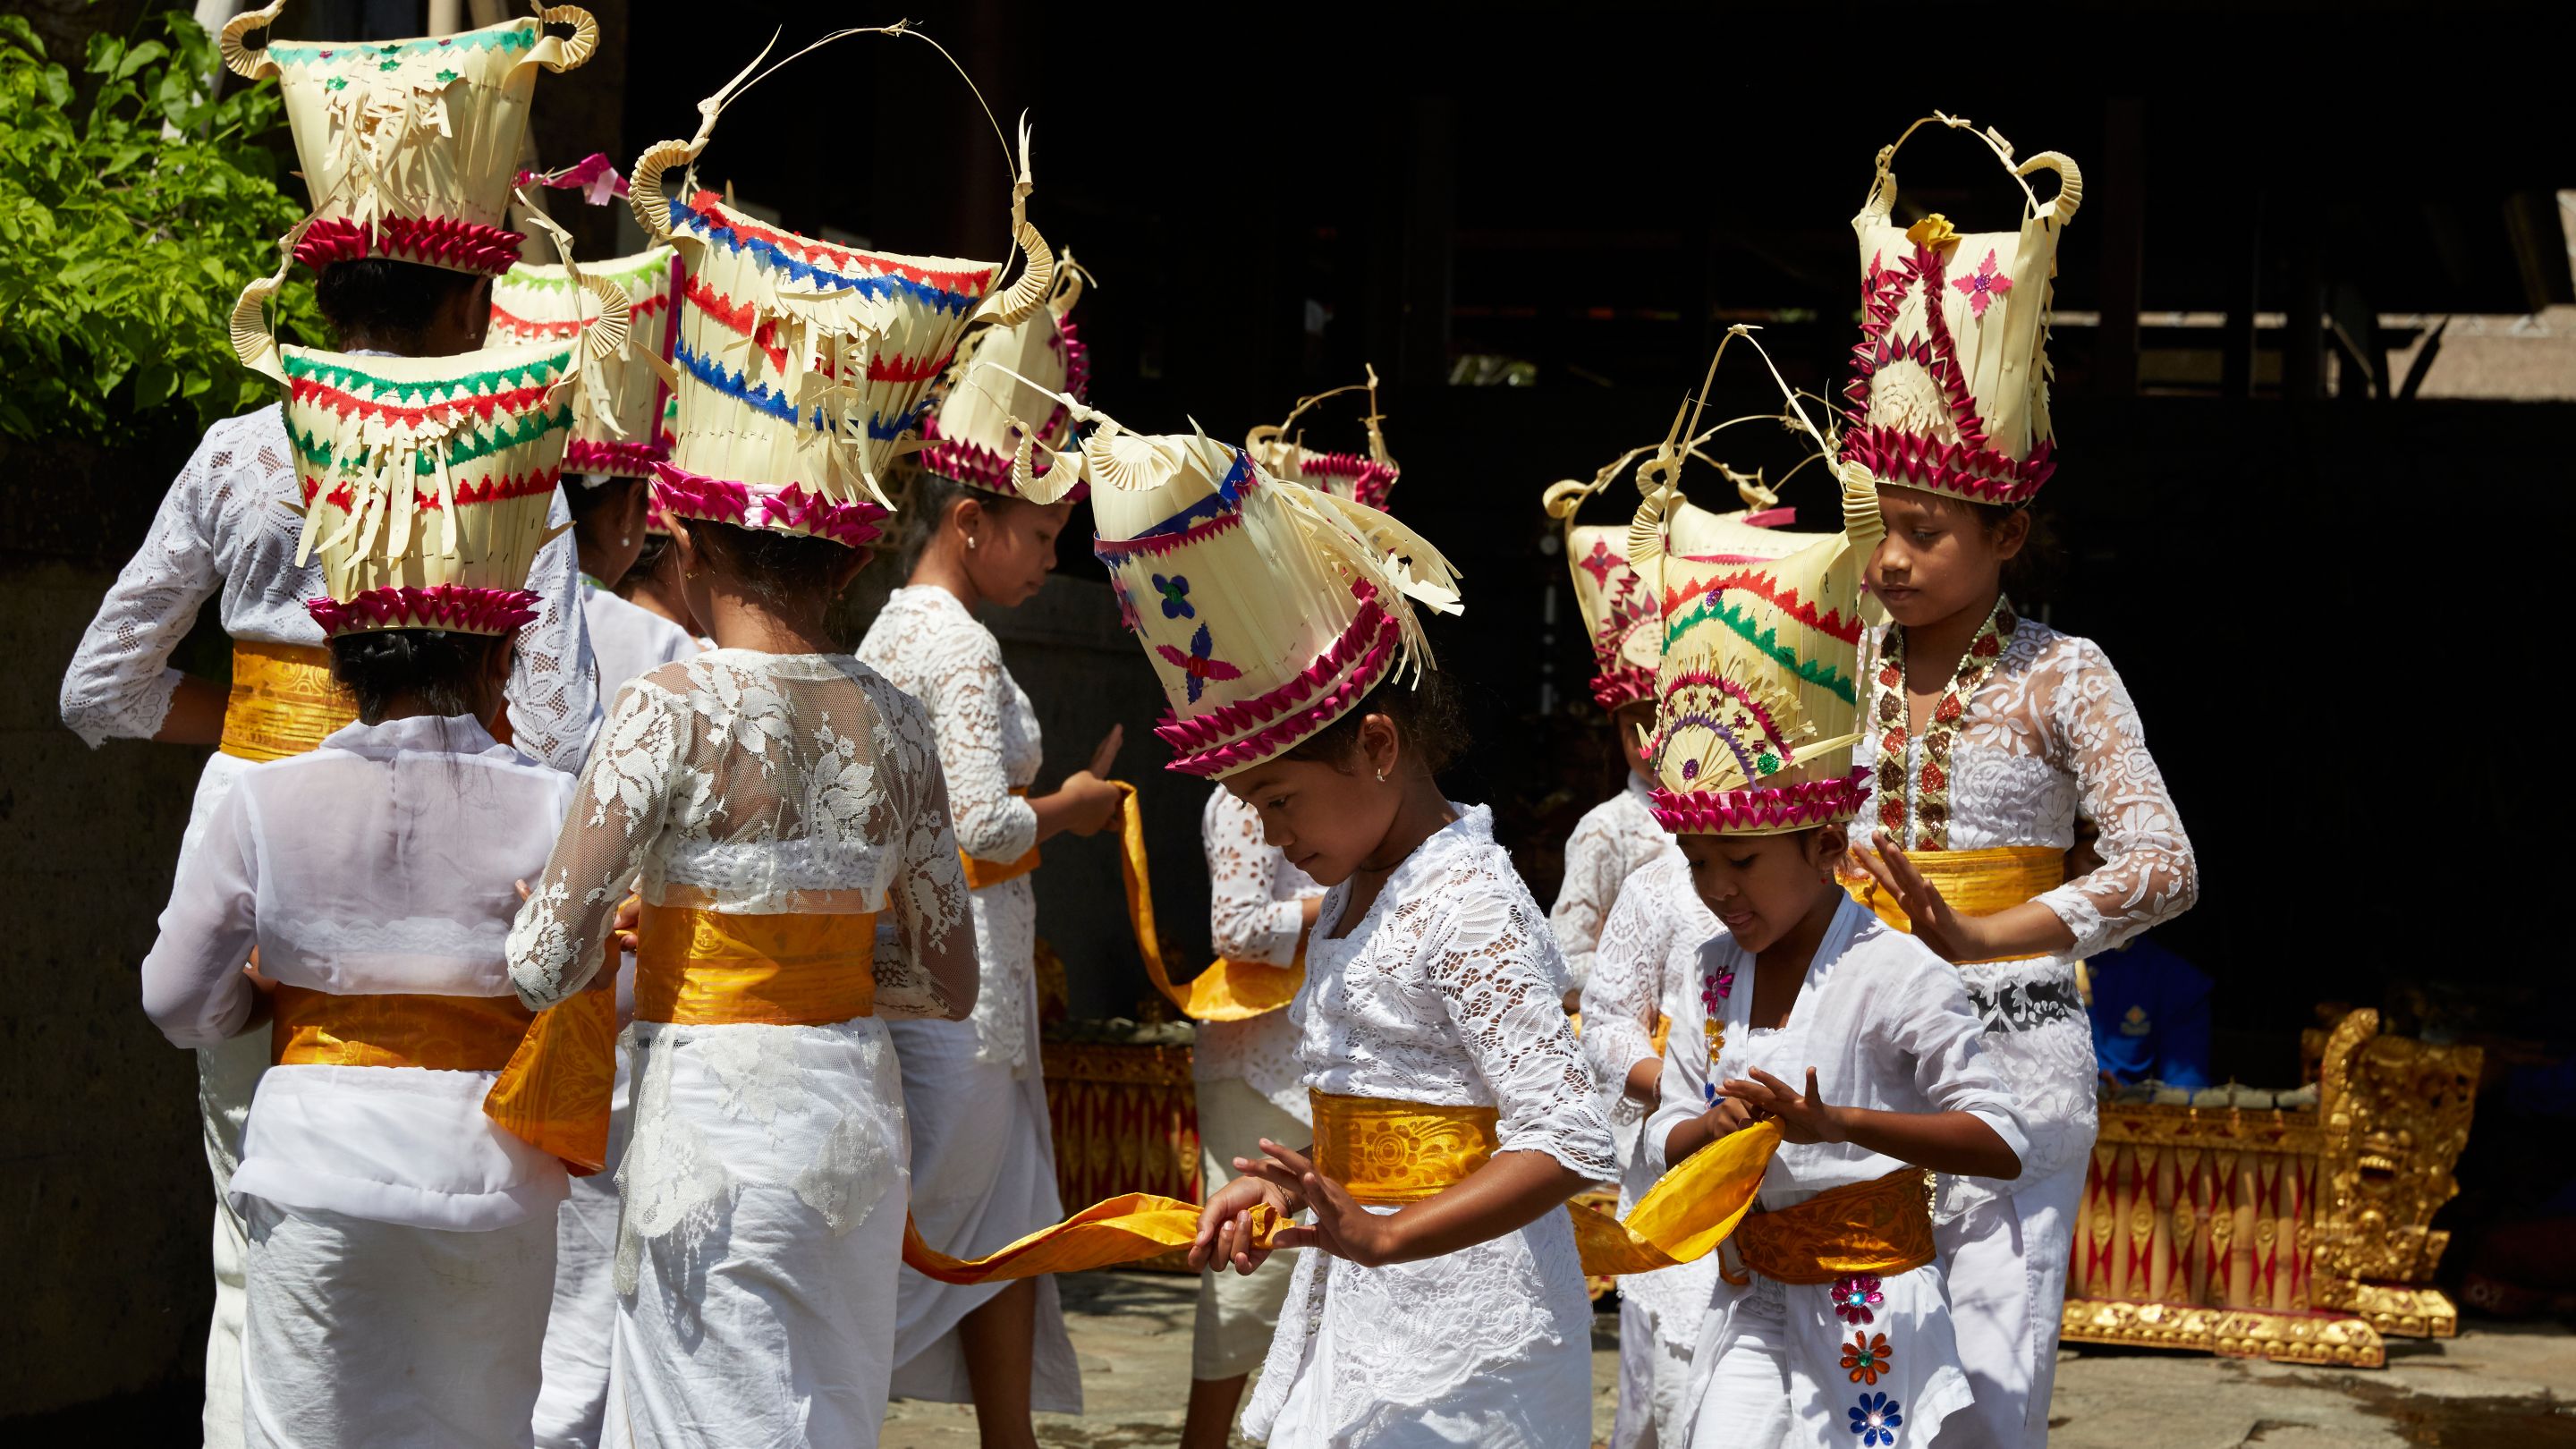 Children wearing white gowns with golden sashes and decorative headdresses walk in line